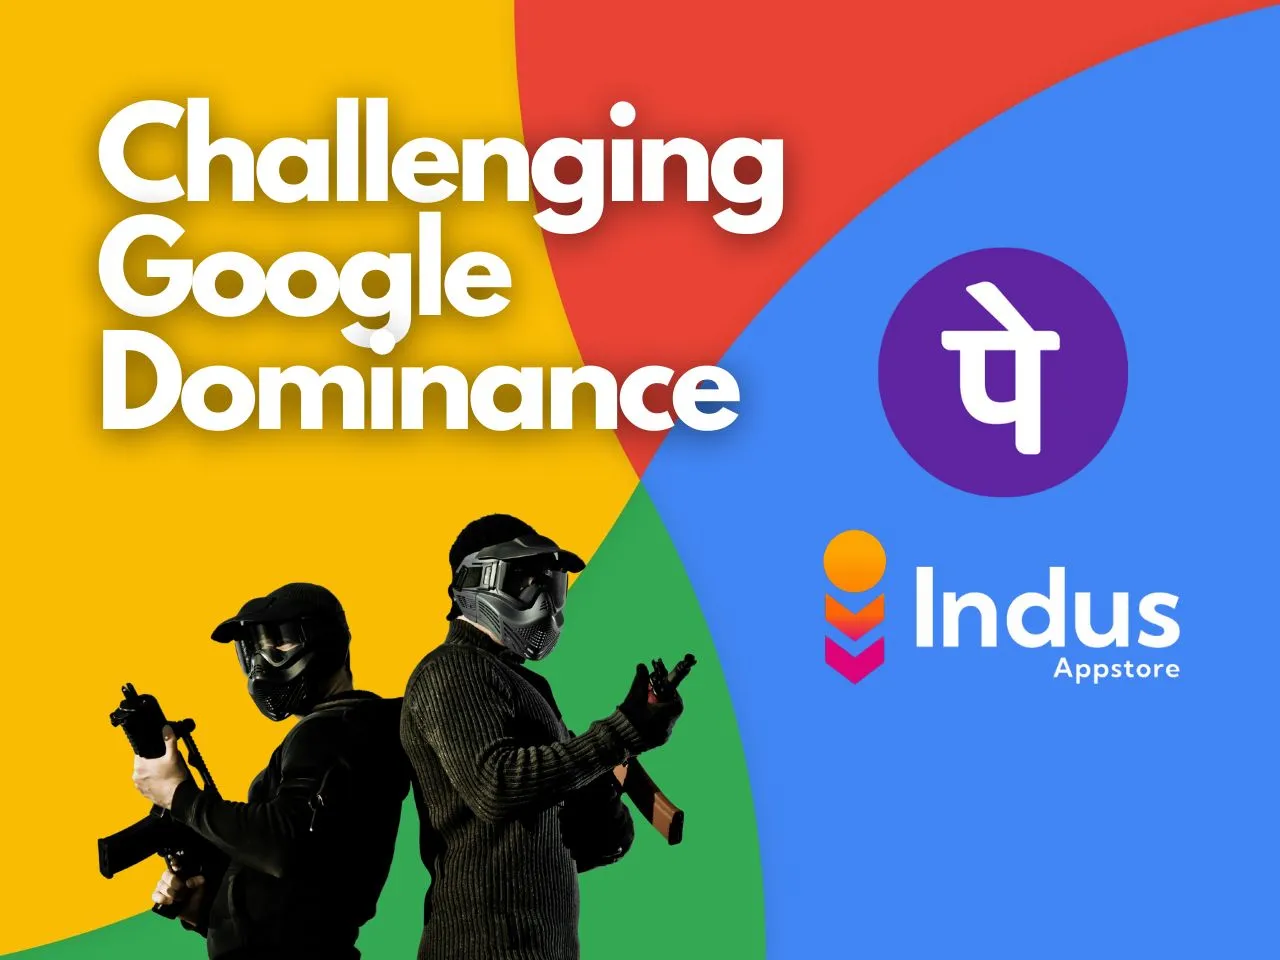 What is Indus App Store? PhonePe Challenges Google Play Store